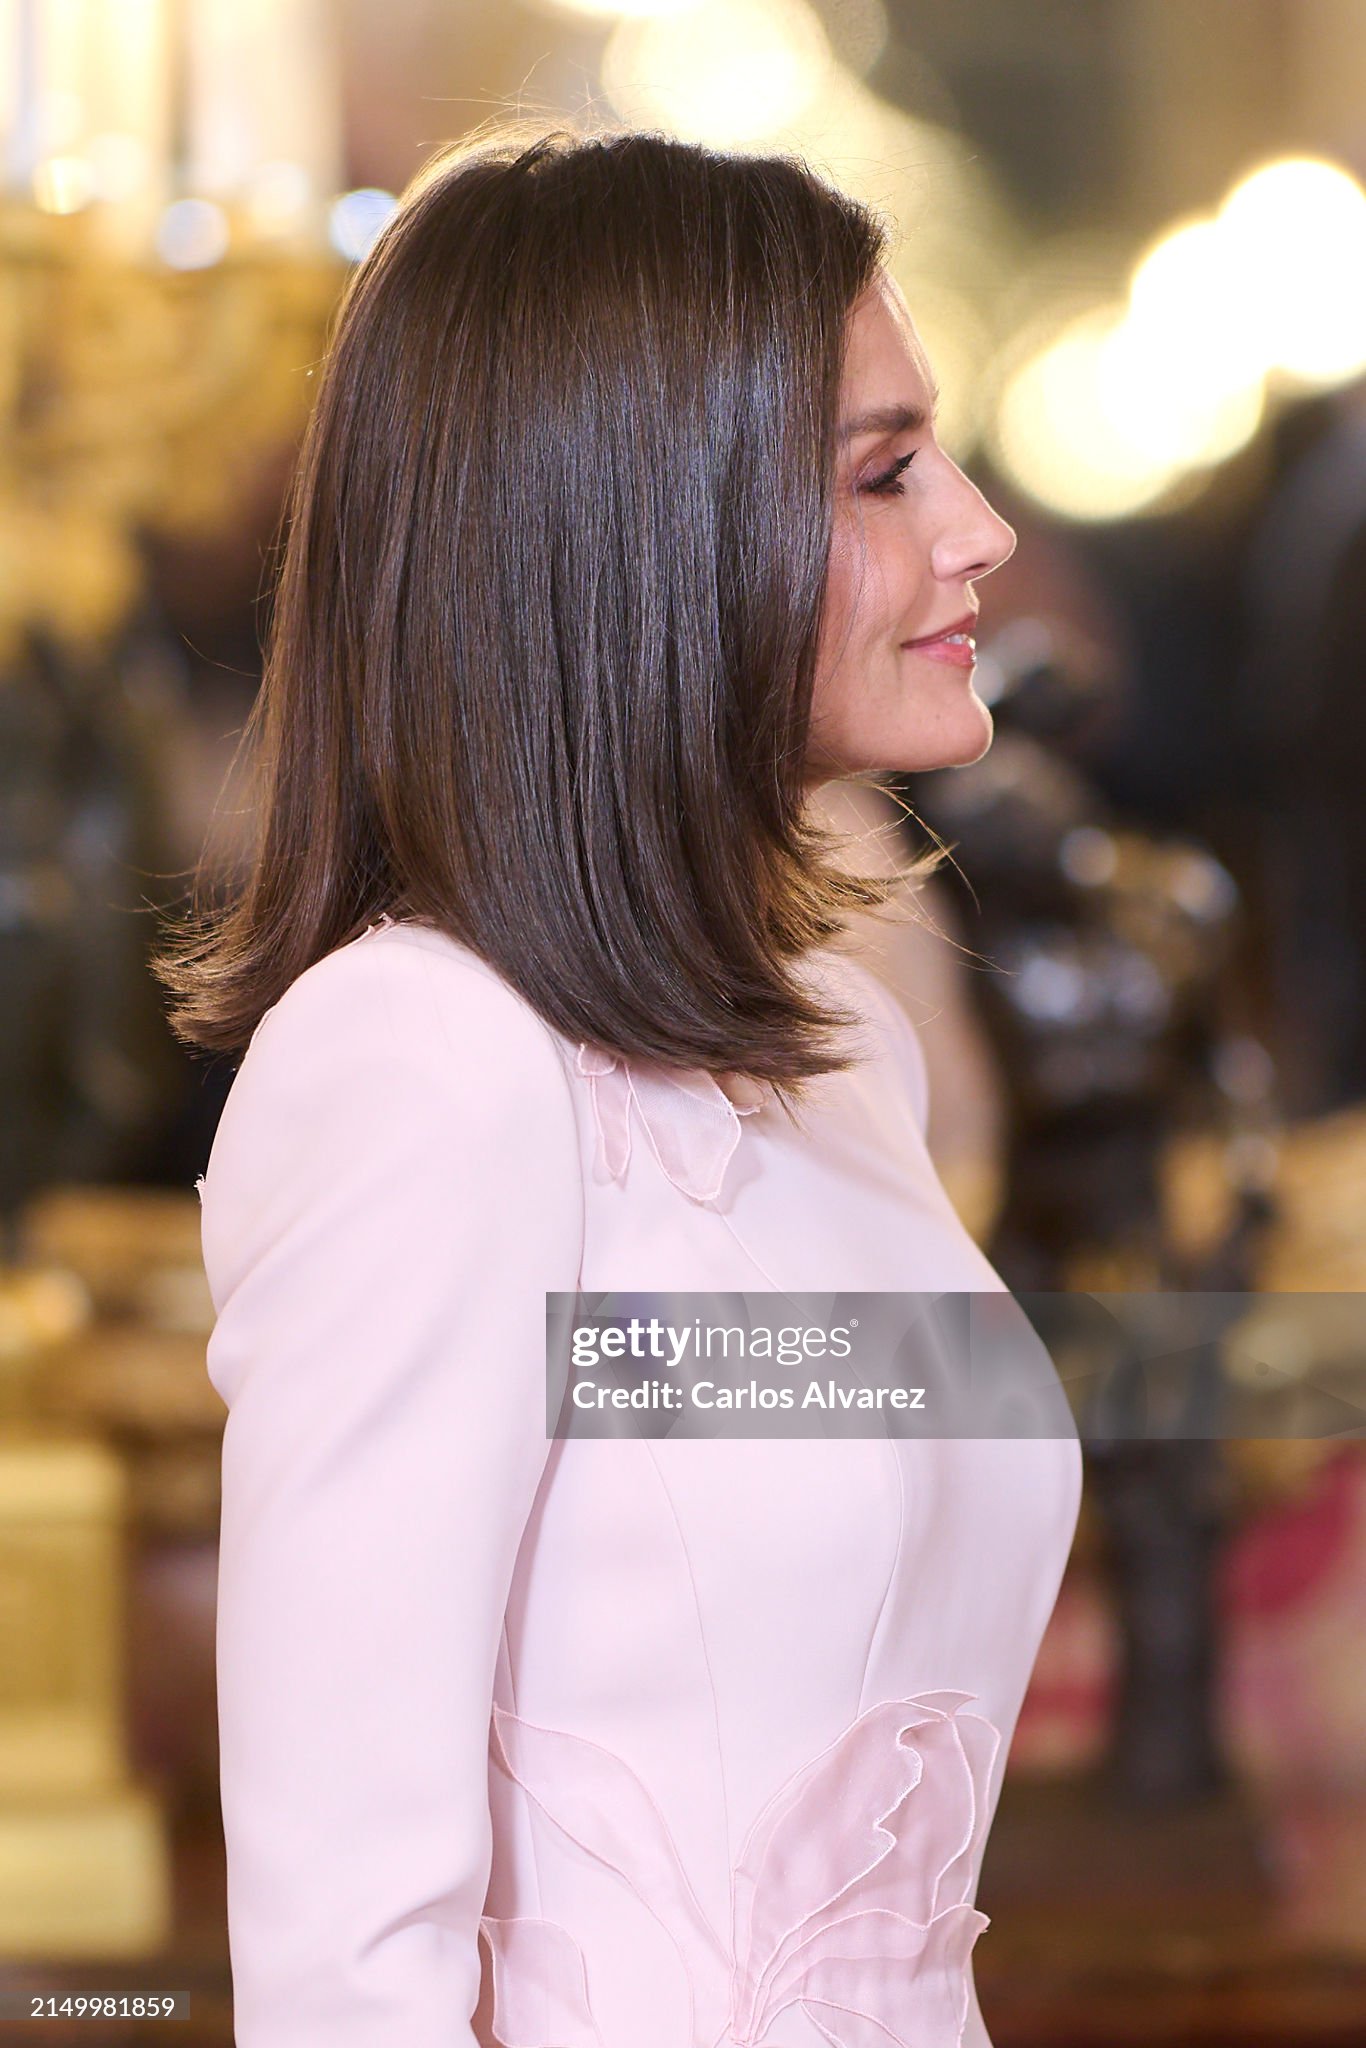 spanish-royals-host-an-official-lunch-for-miguel-de-cervantes-2023-award.jpg?s=2048x2048&w=gi&k=20&c=i_hIy-KjJ_aoDdFDh_8pt-S6baWYYqfLUJm500z7cHY=